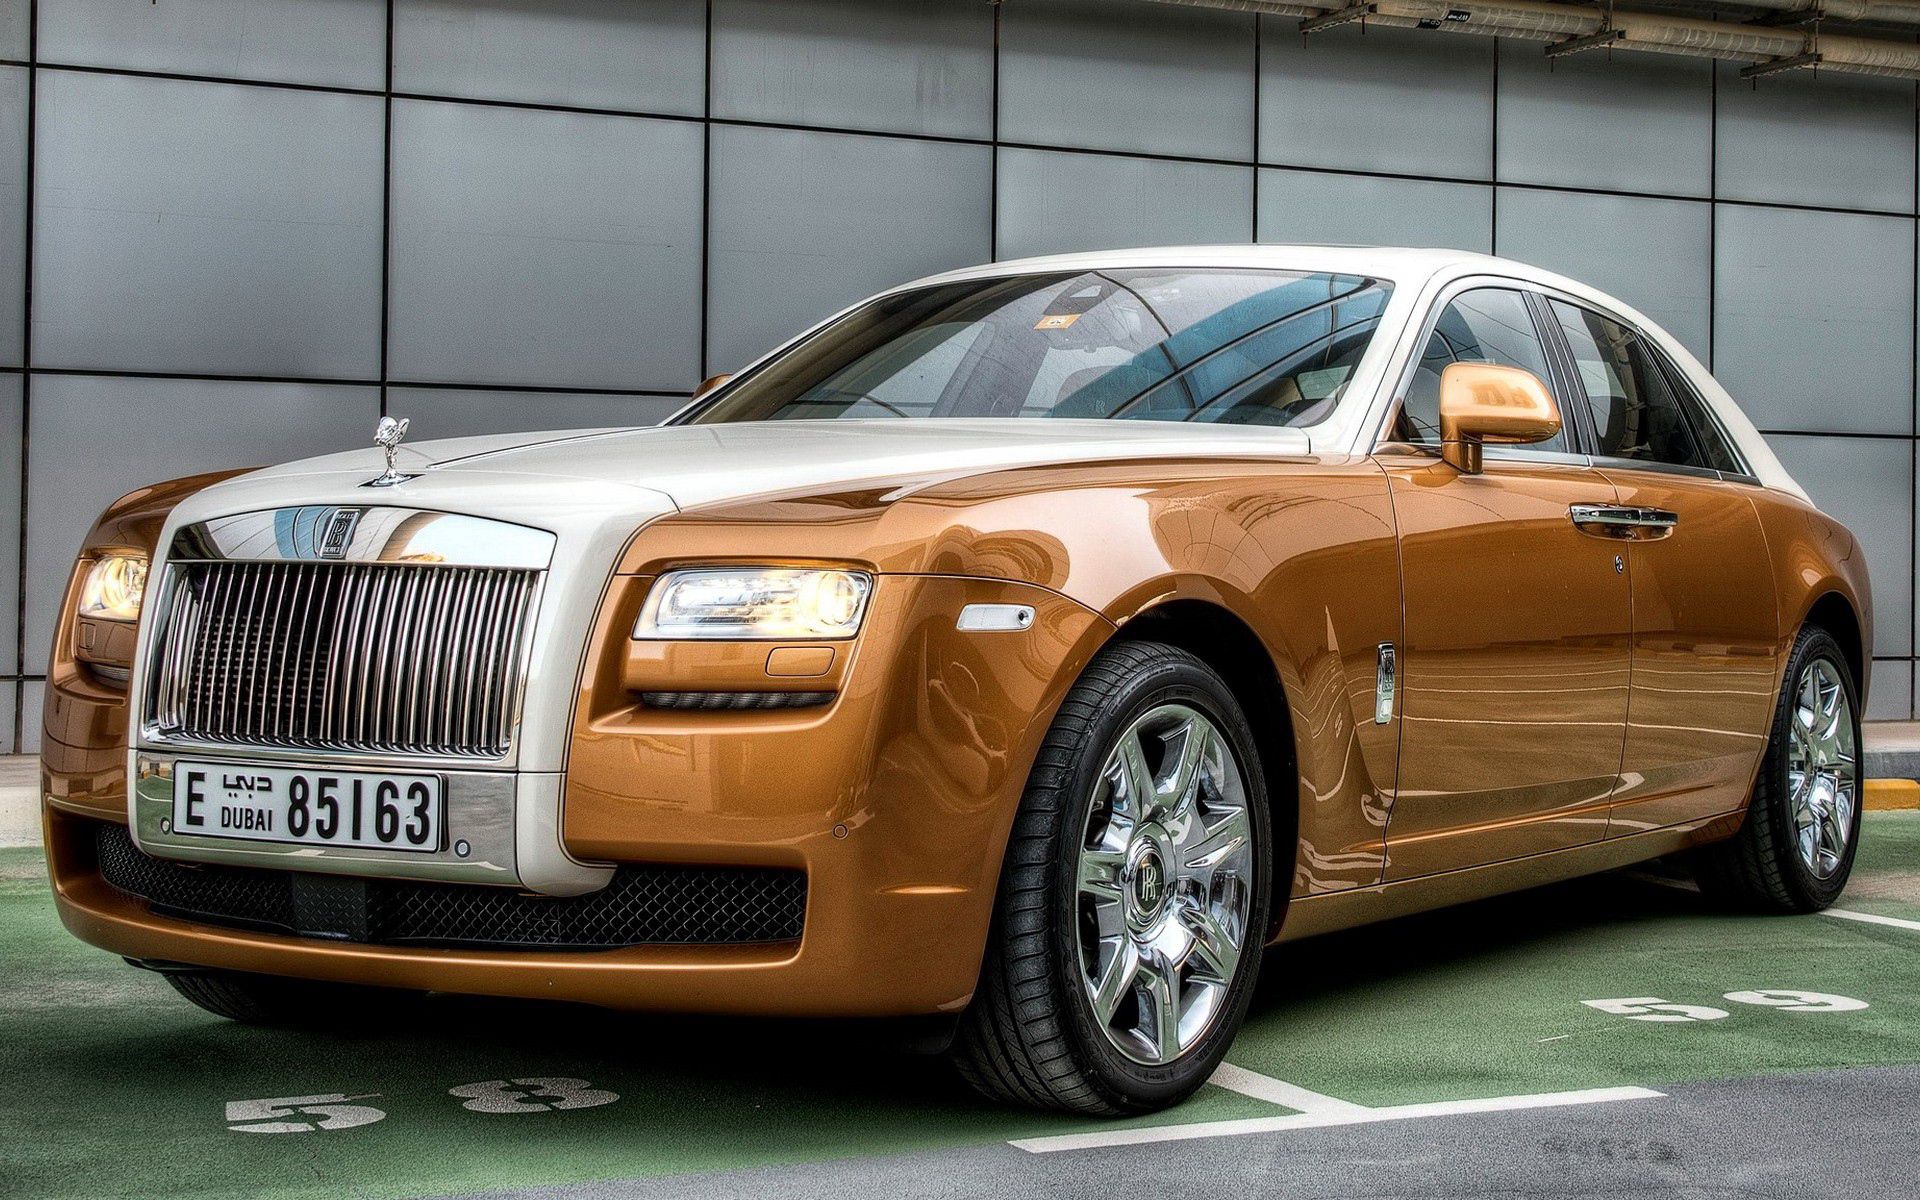 rolls-royce, cars, car, side view, luxurious